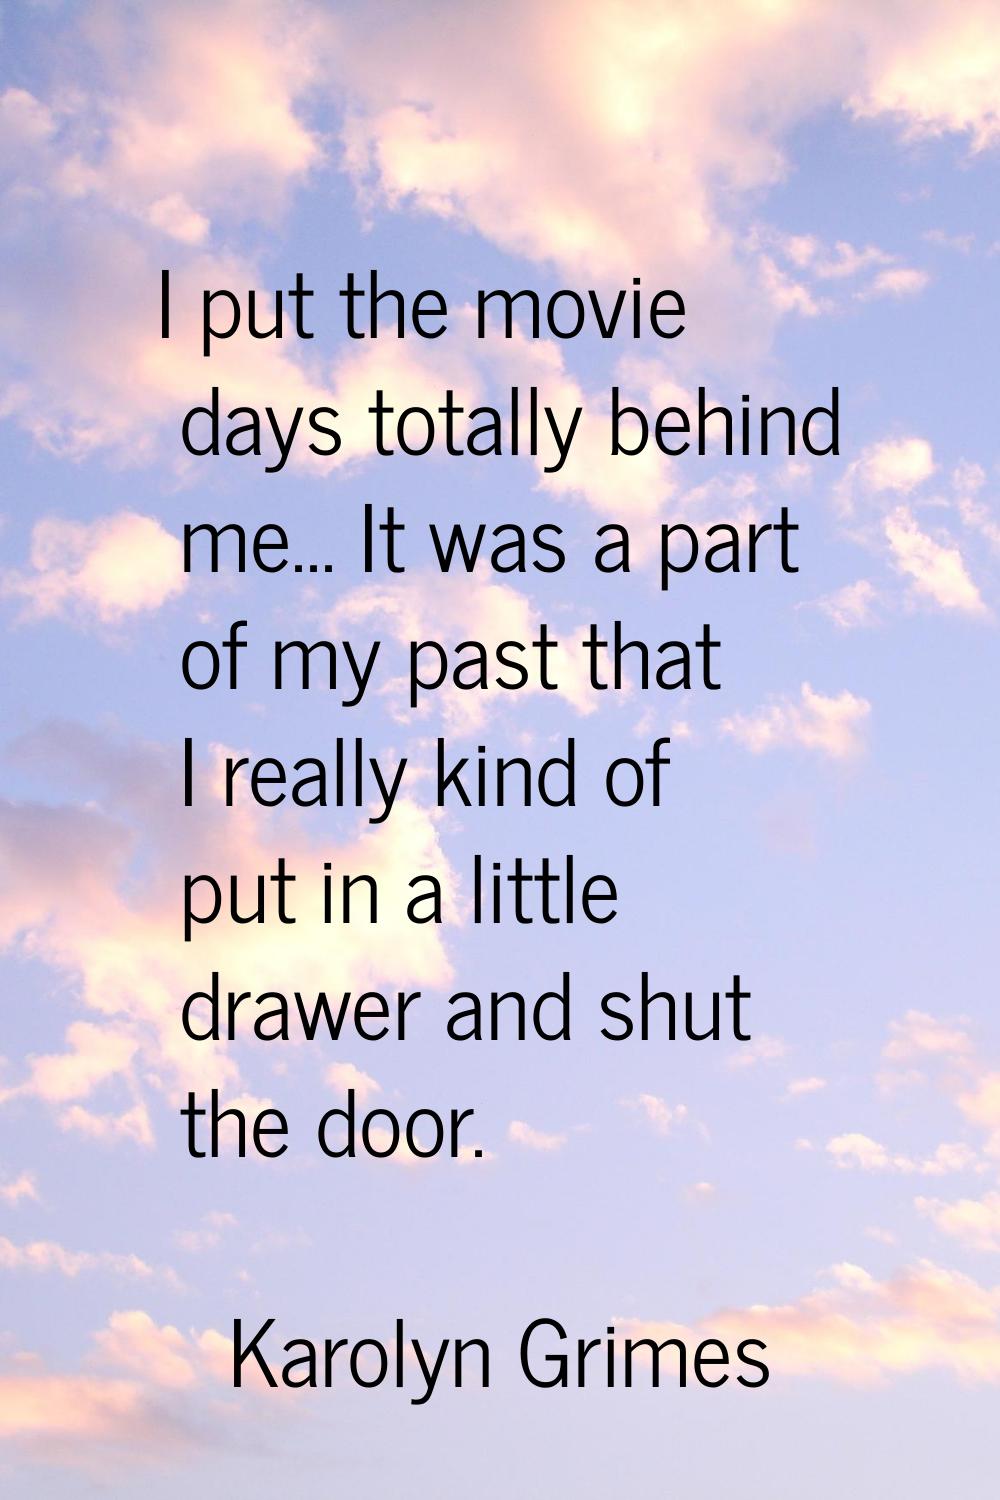 I put the movie days totally behind me... It was a part of my past that I really kind of put in a l